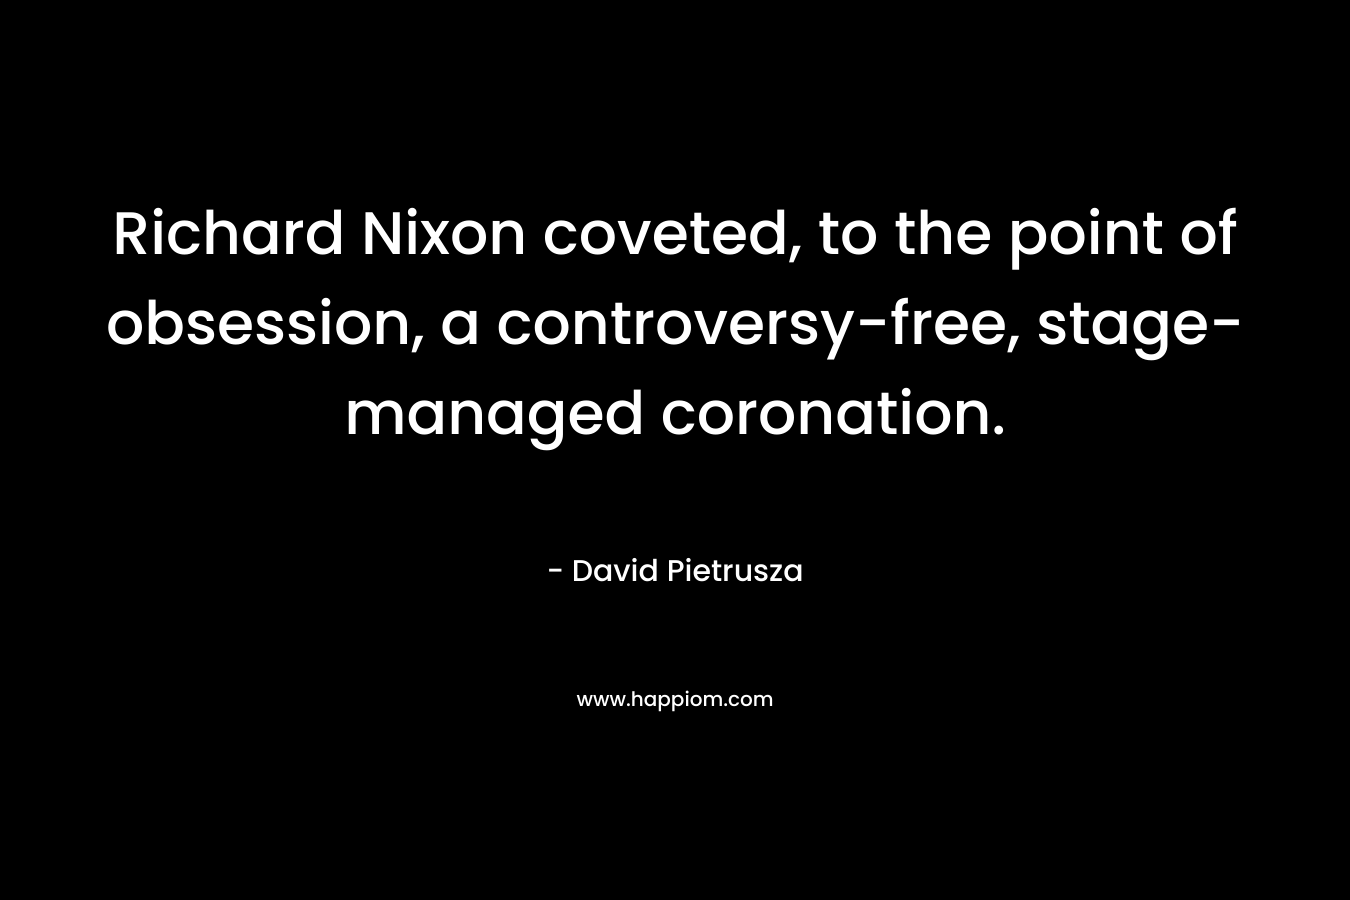 Richard Nixon coveted, to the point of obsession, a controversy-free, stage-managed coronation.